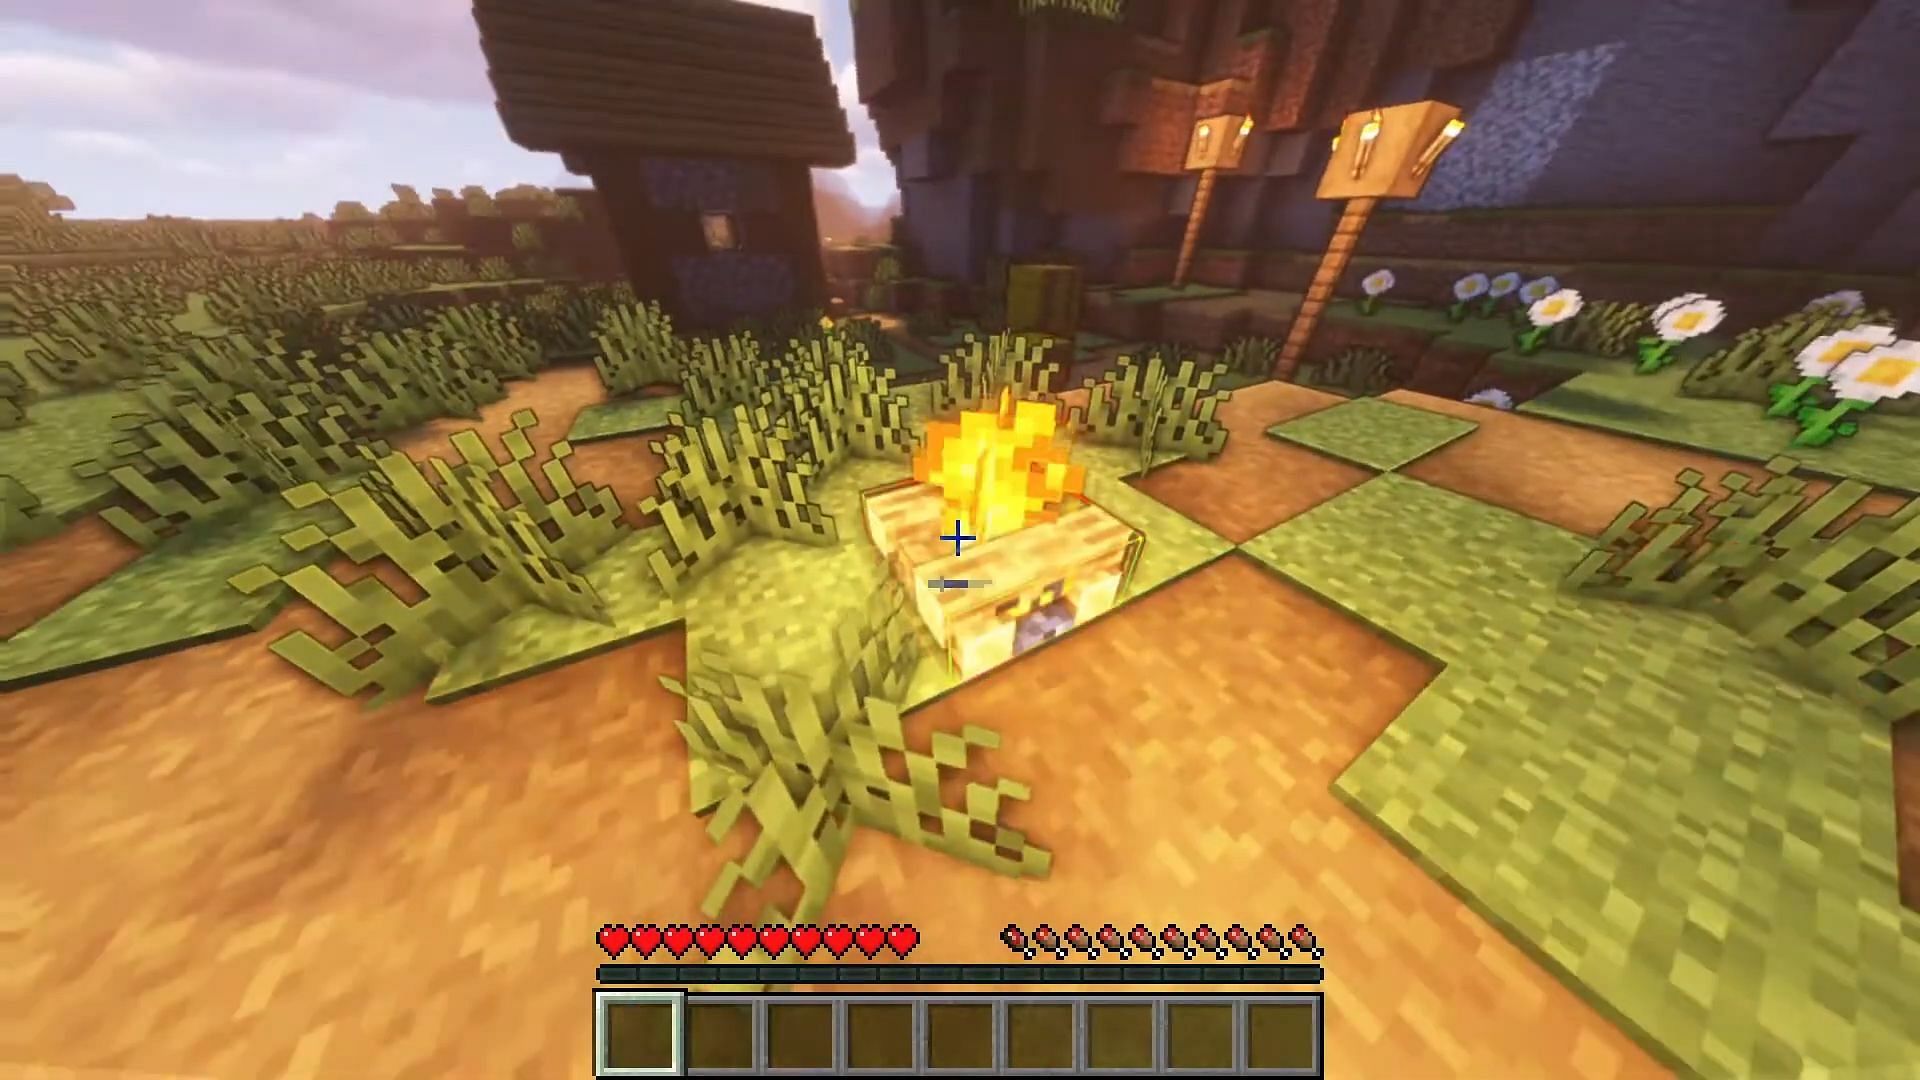 Healing Campfires gives Minecraft players even more reasons to relax around the fire (Image via Dabworksgaming/YouTube)